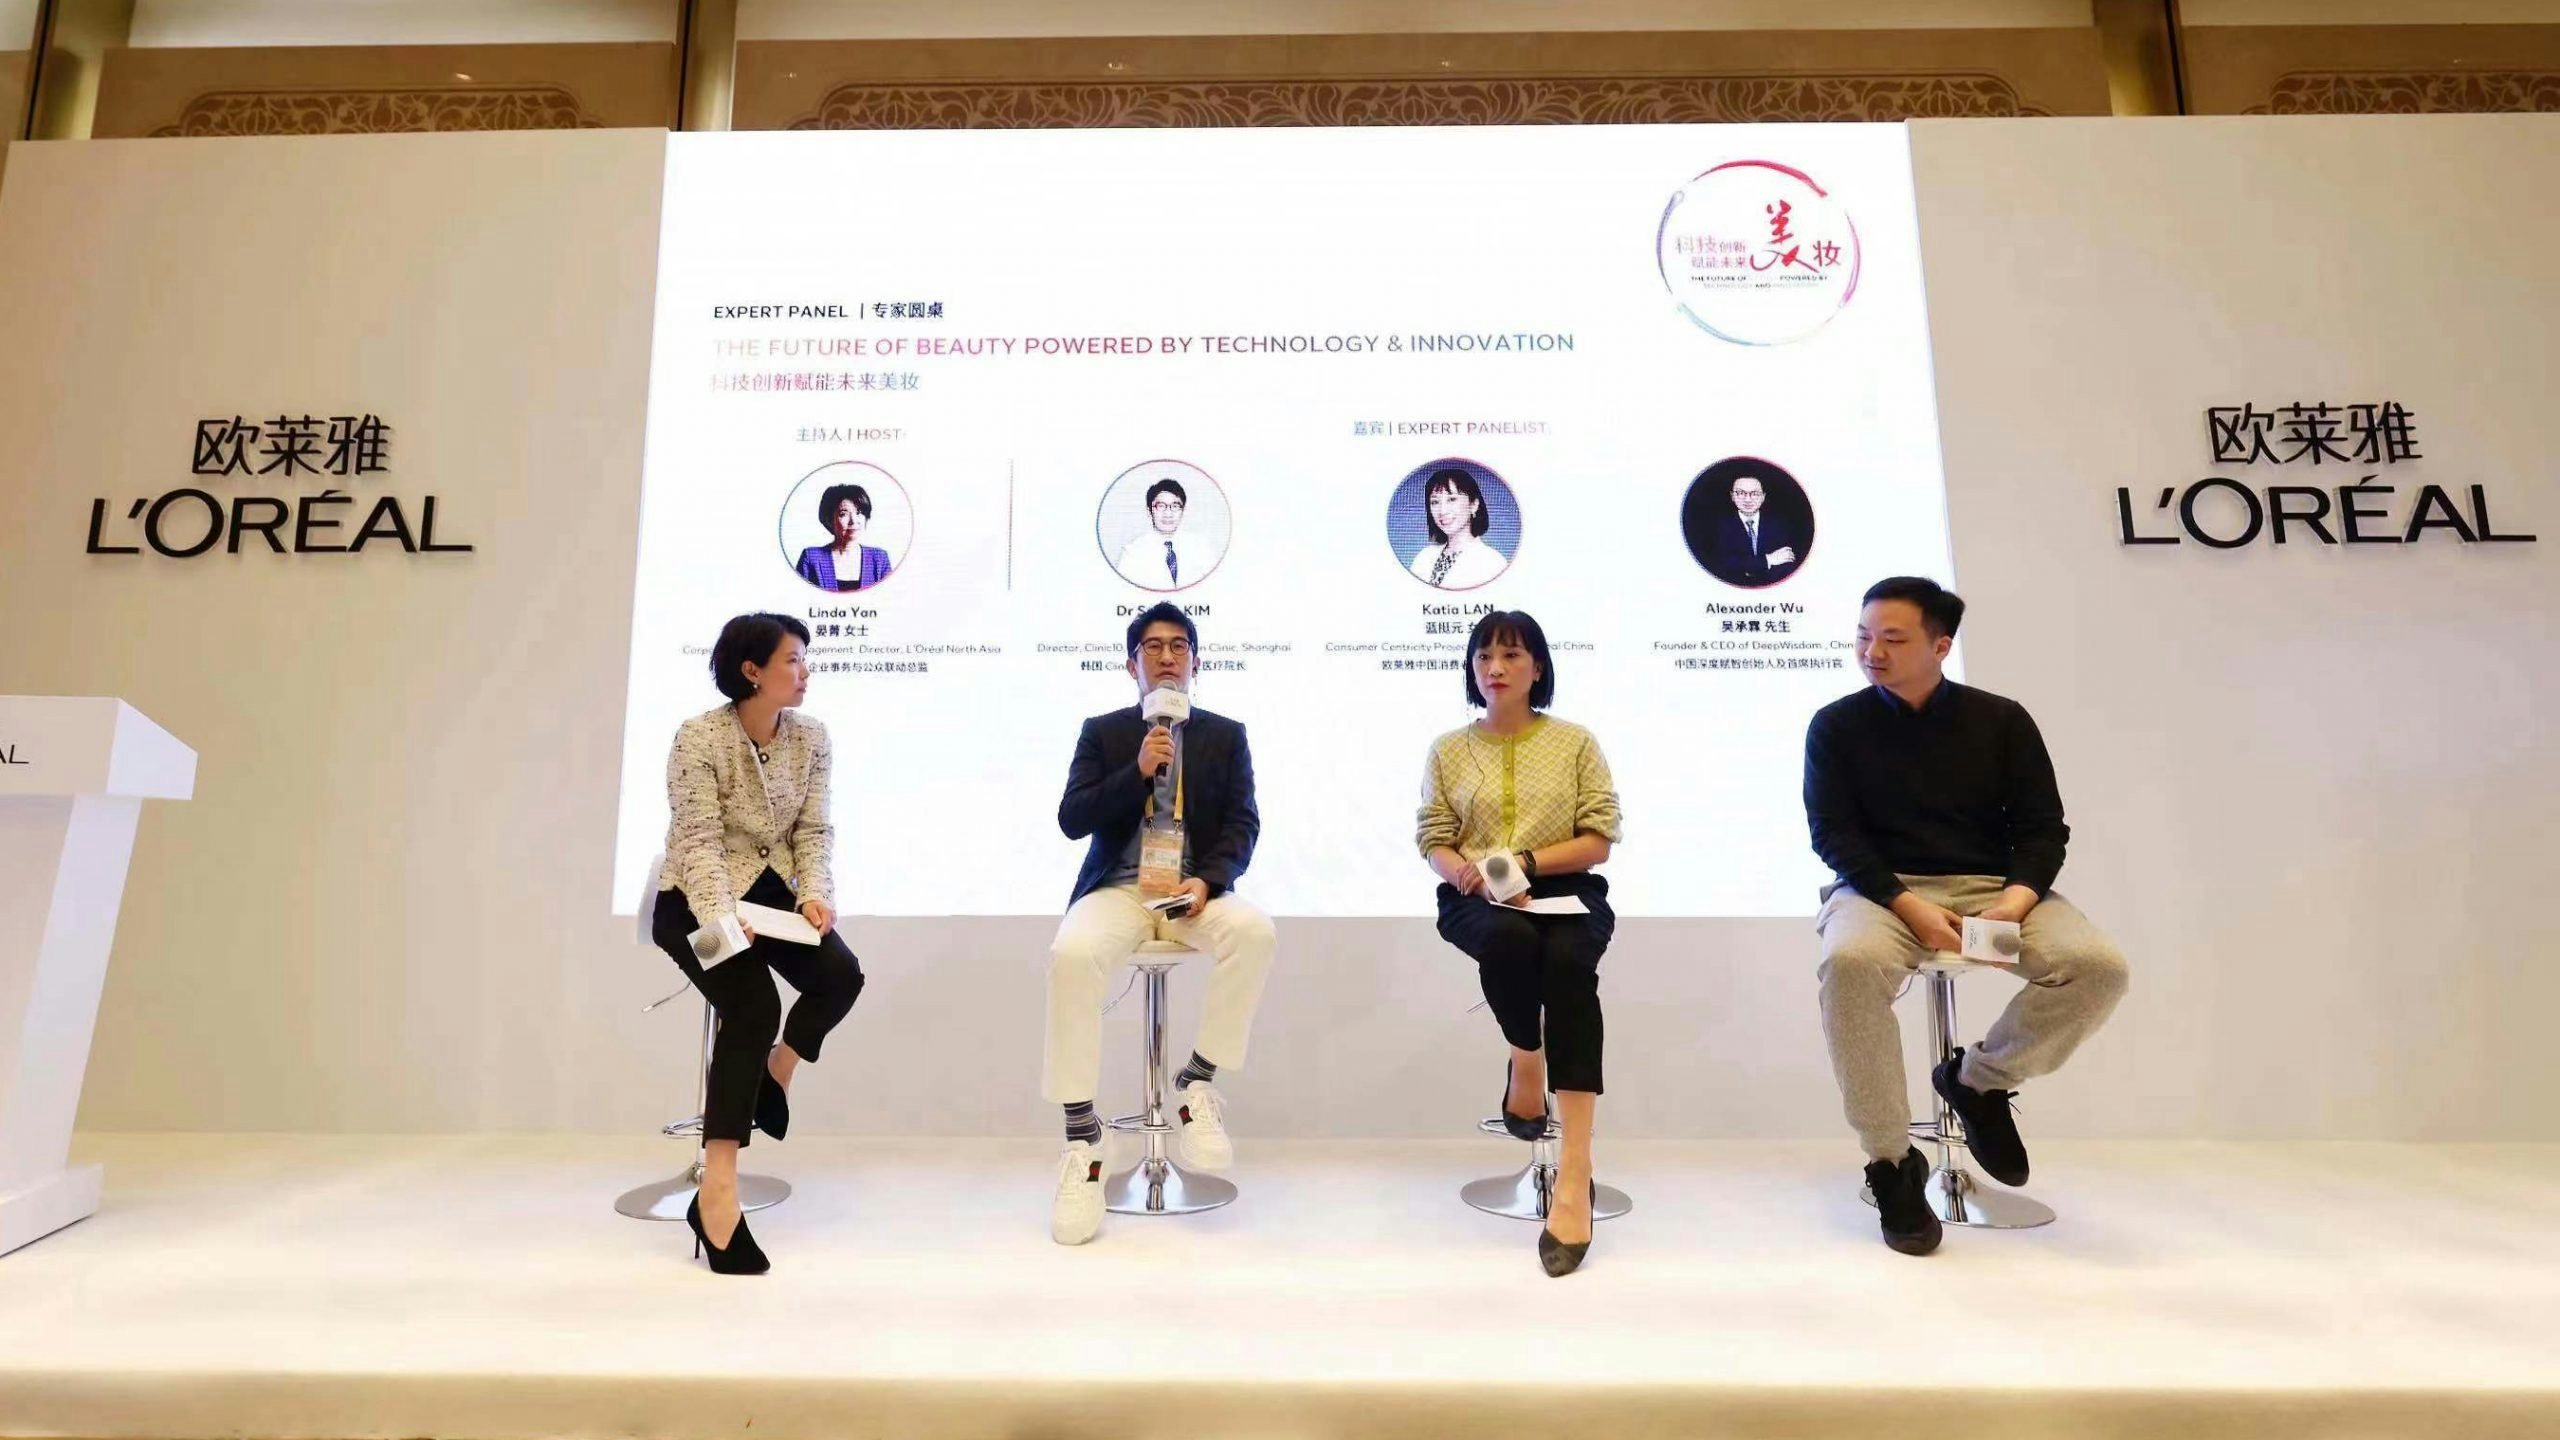 L’Oréal shows its prowess in the North Asia region by hosting its first-ever beauty industry innovation summit during the China International Import Expo. Photo: Courtesy